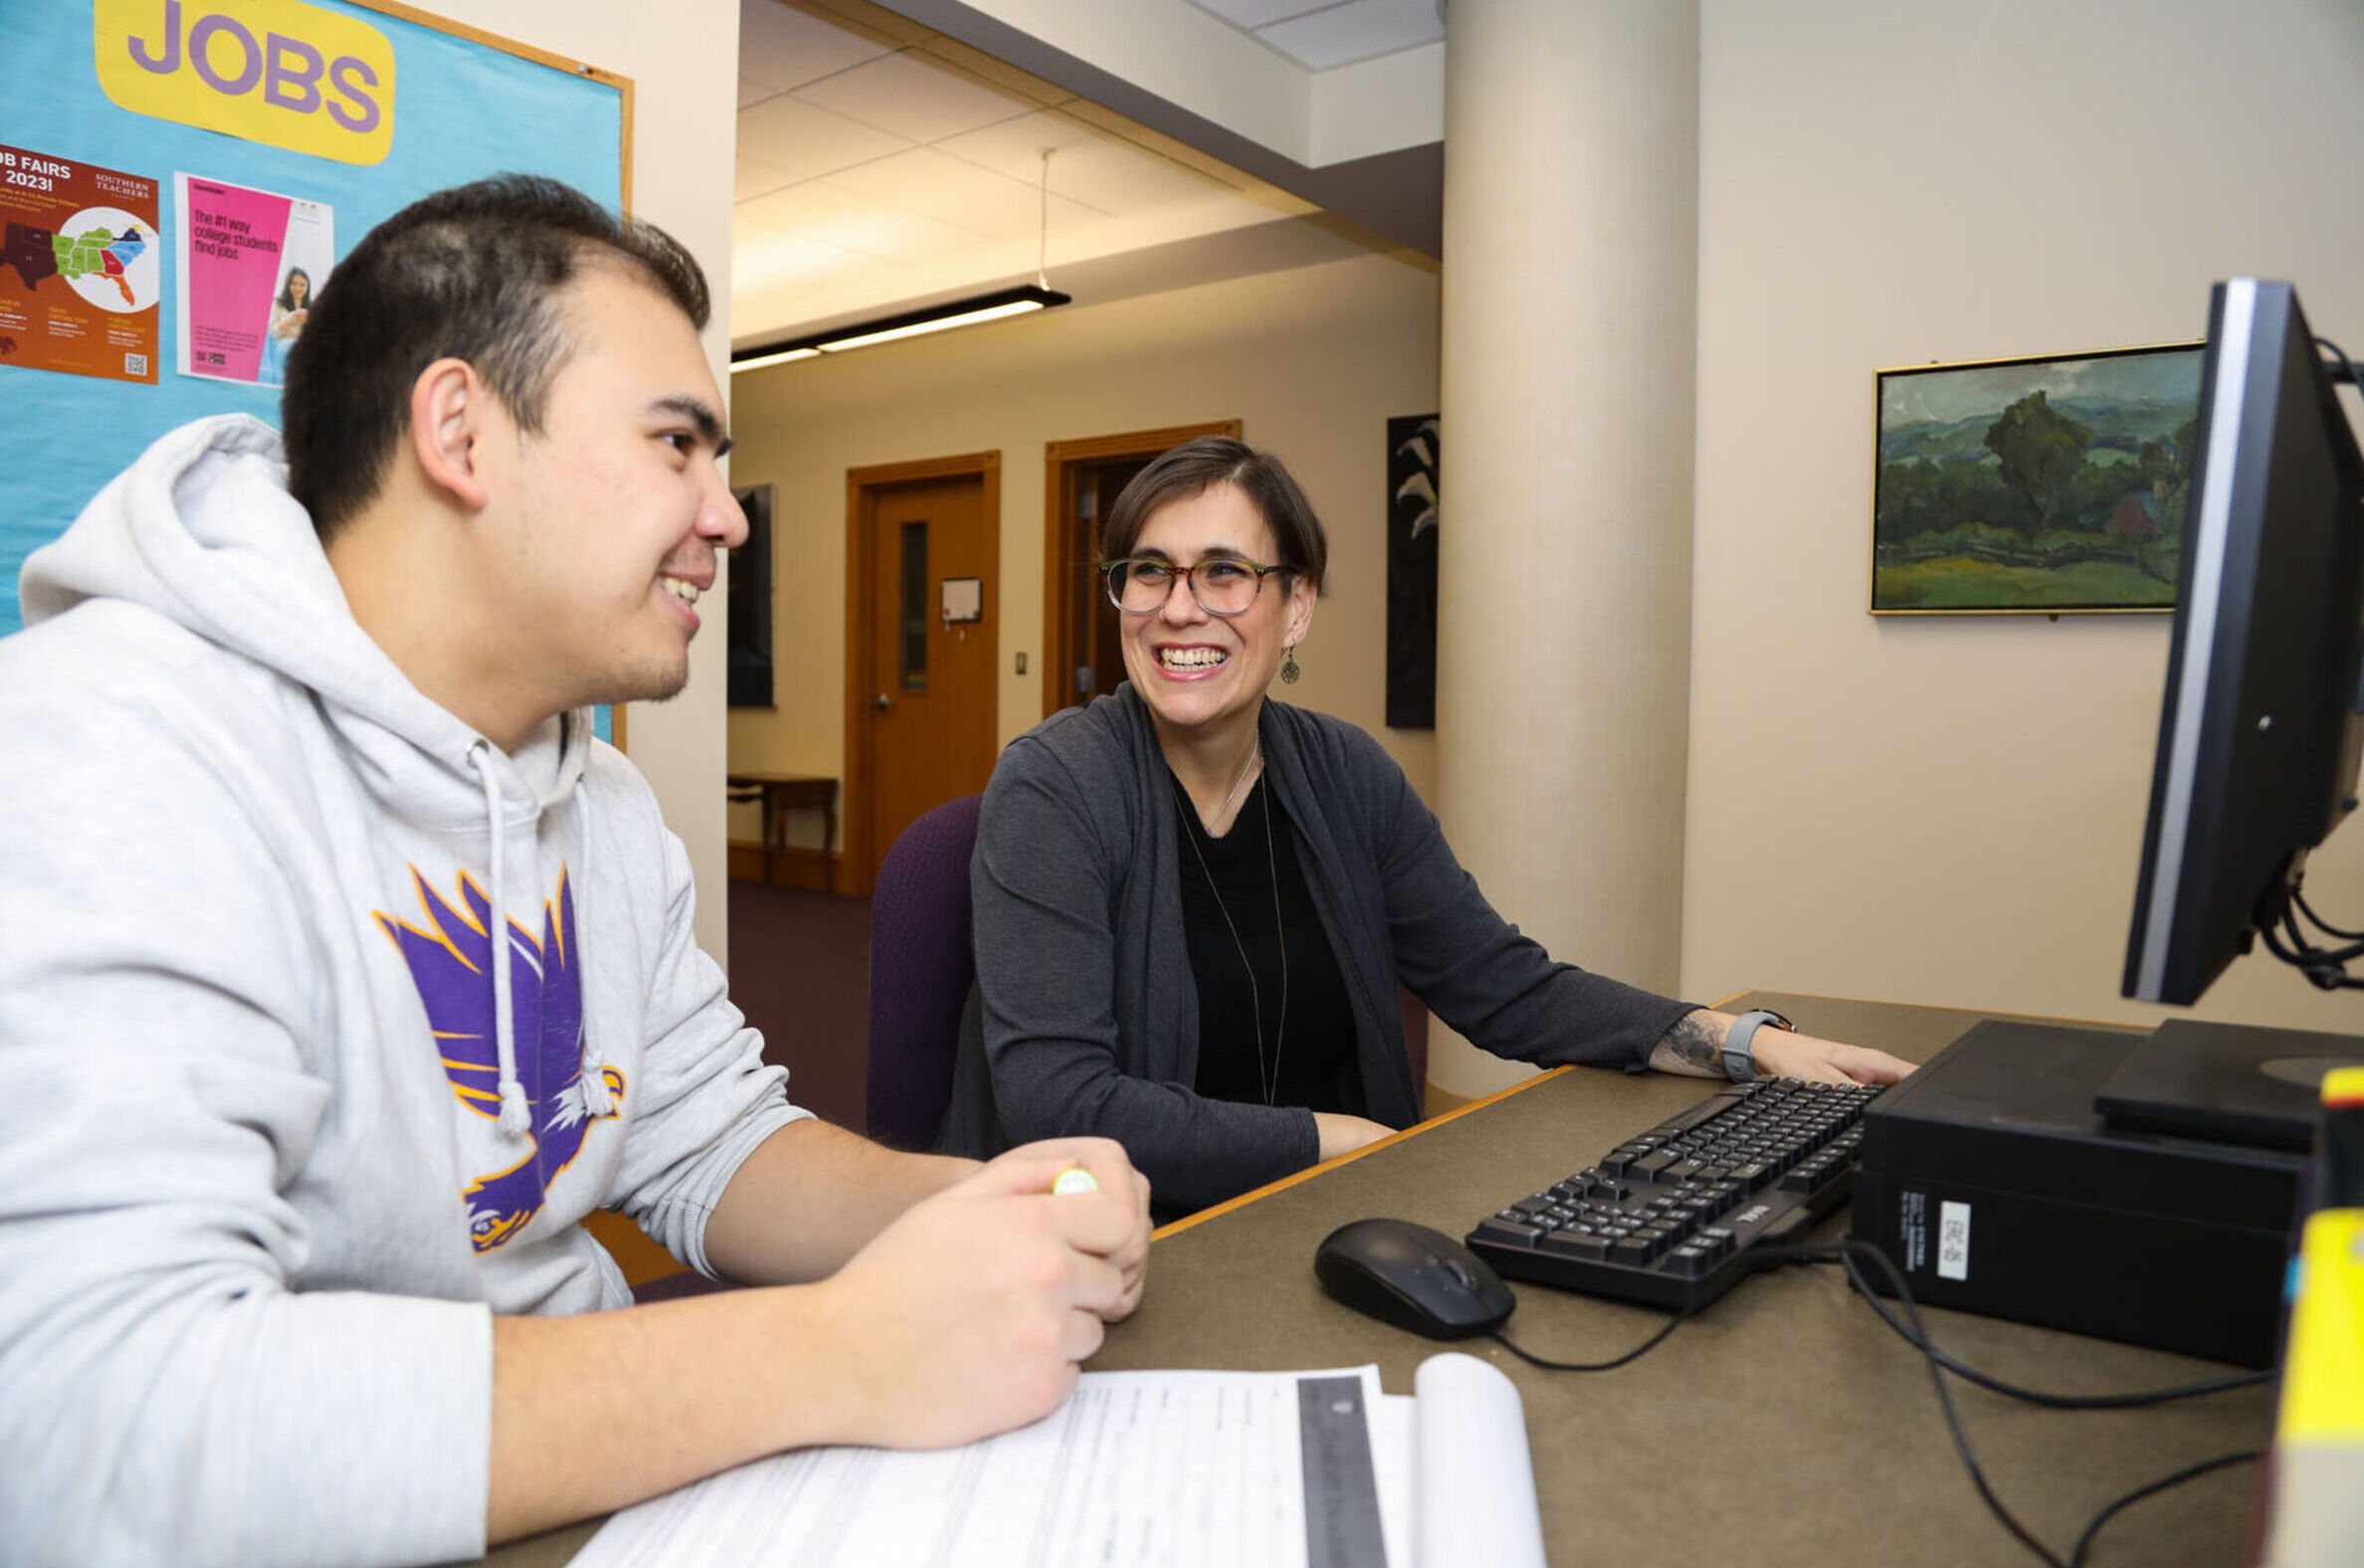 A career counselor helps a student prepare for his future